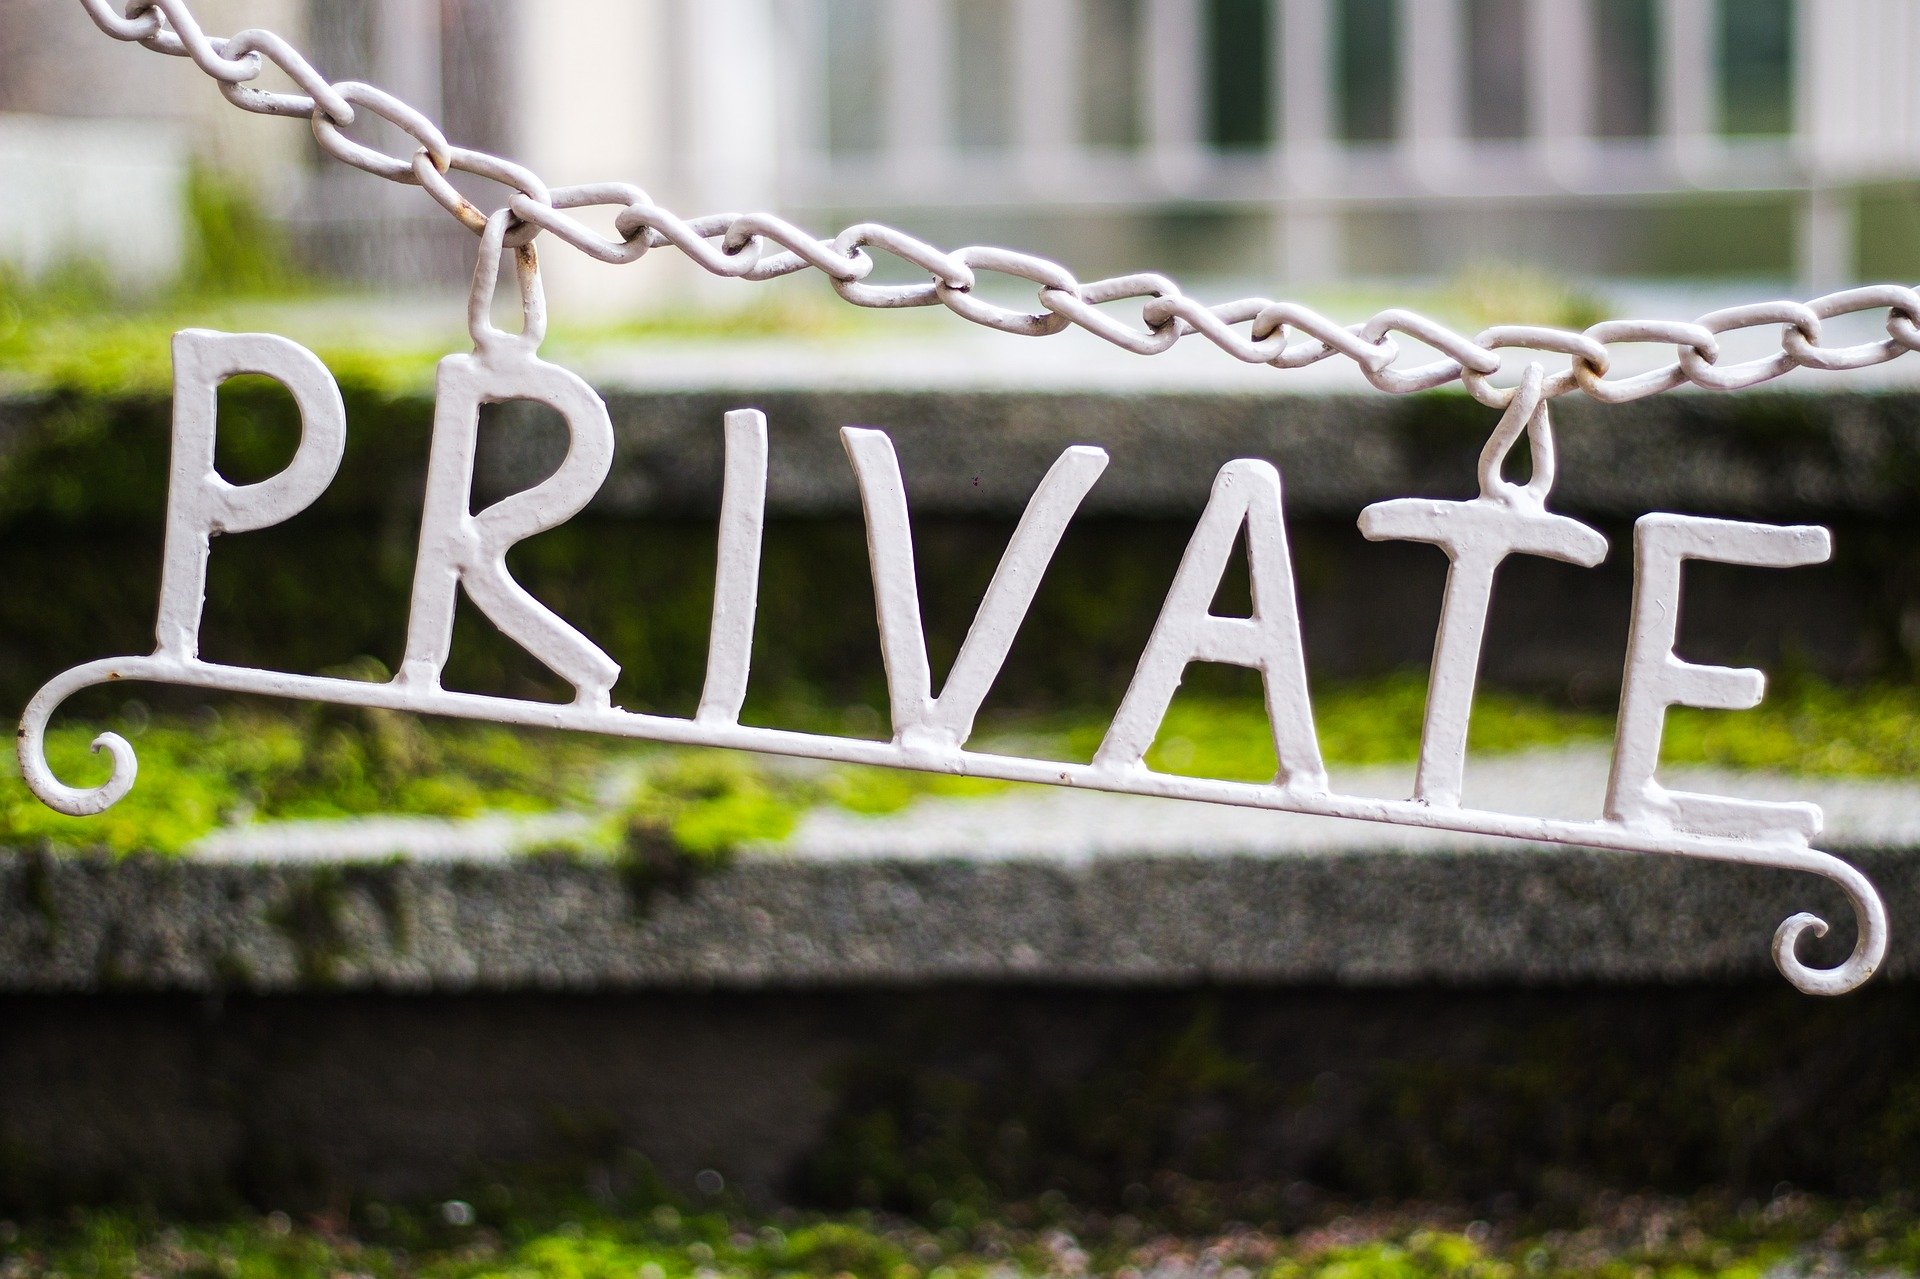 A "private" sign hanging from chains. | Source: Pixabay.